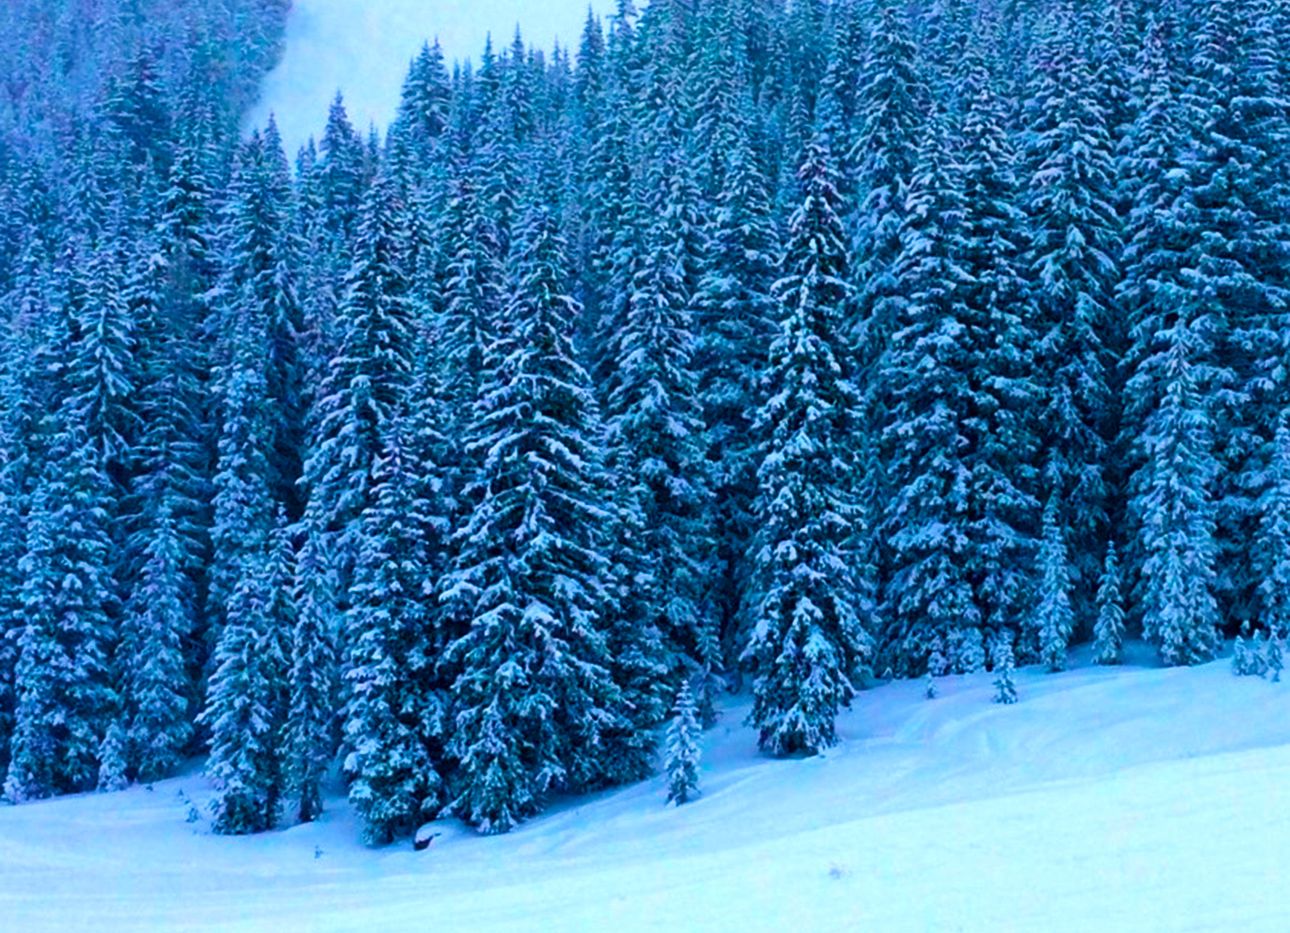 A forest of pine trees in the snow on a mountain.